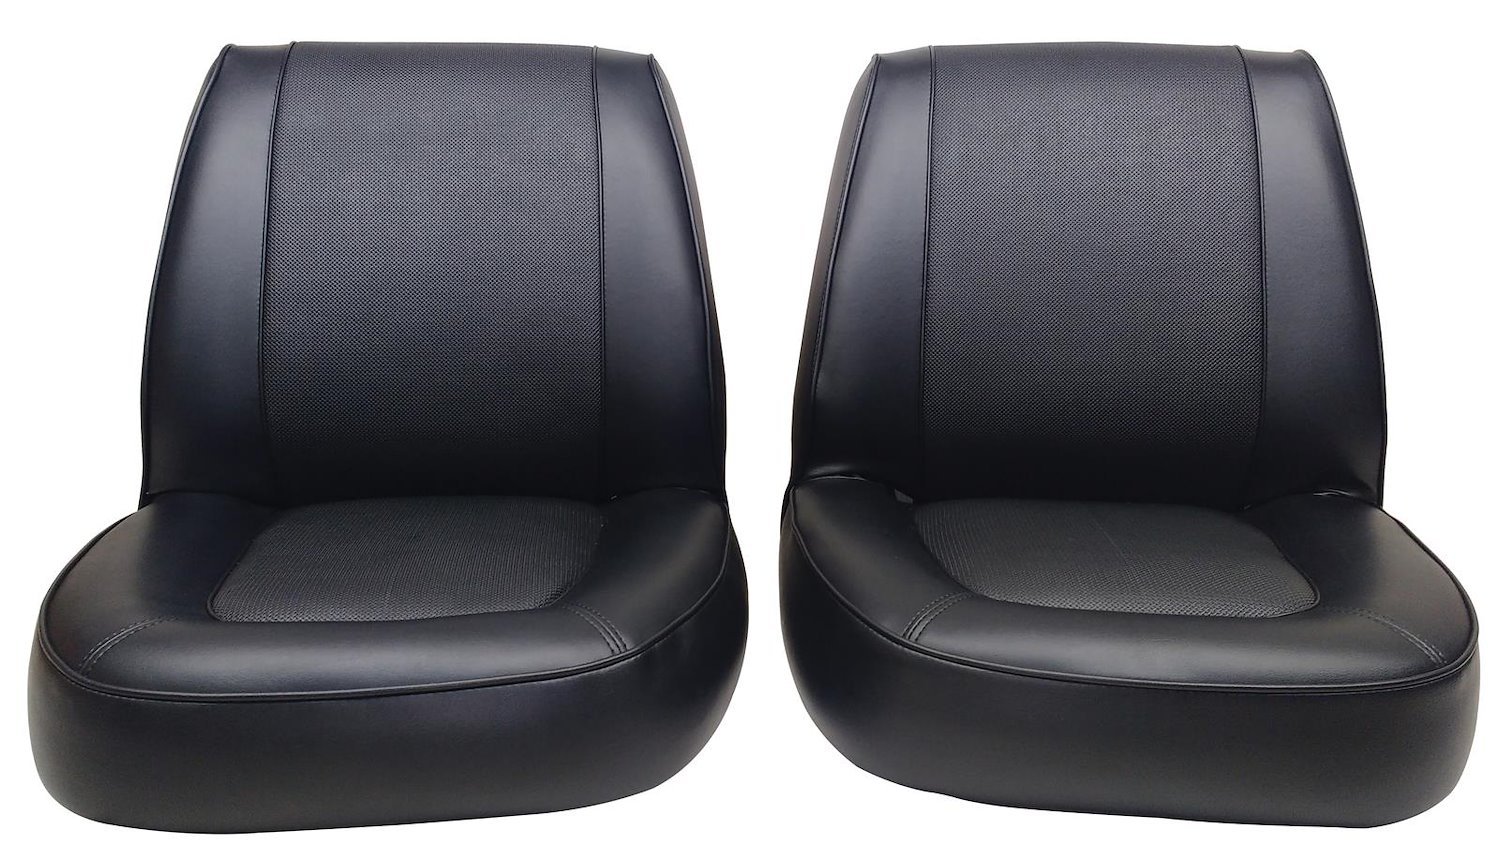 1965 Ford Falcon Futura 2-Door and Ranchero Interior Two-Tone Front Bucket Seat Upholstery Set